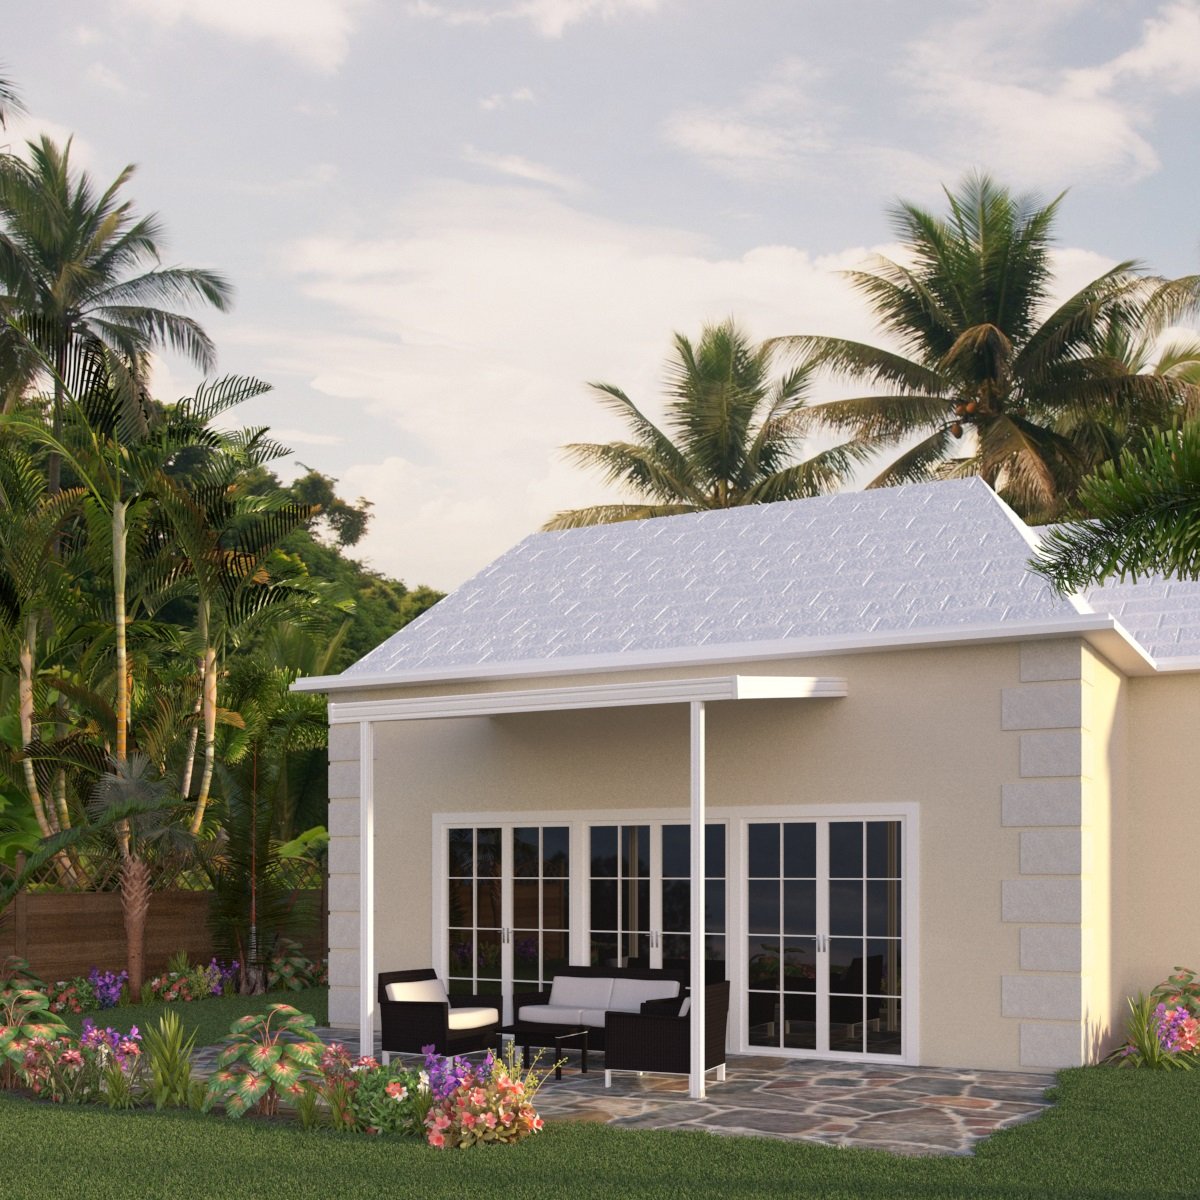 08 ft. Deep x 14 ft. Wide White Attached Aluminum Patio Cover -2 Posts - (10lb Low Snow Area)